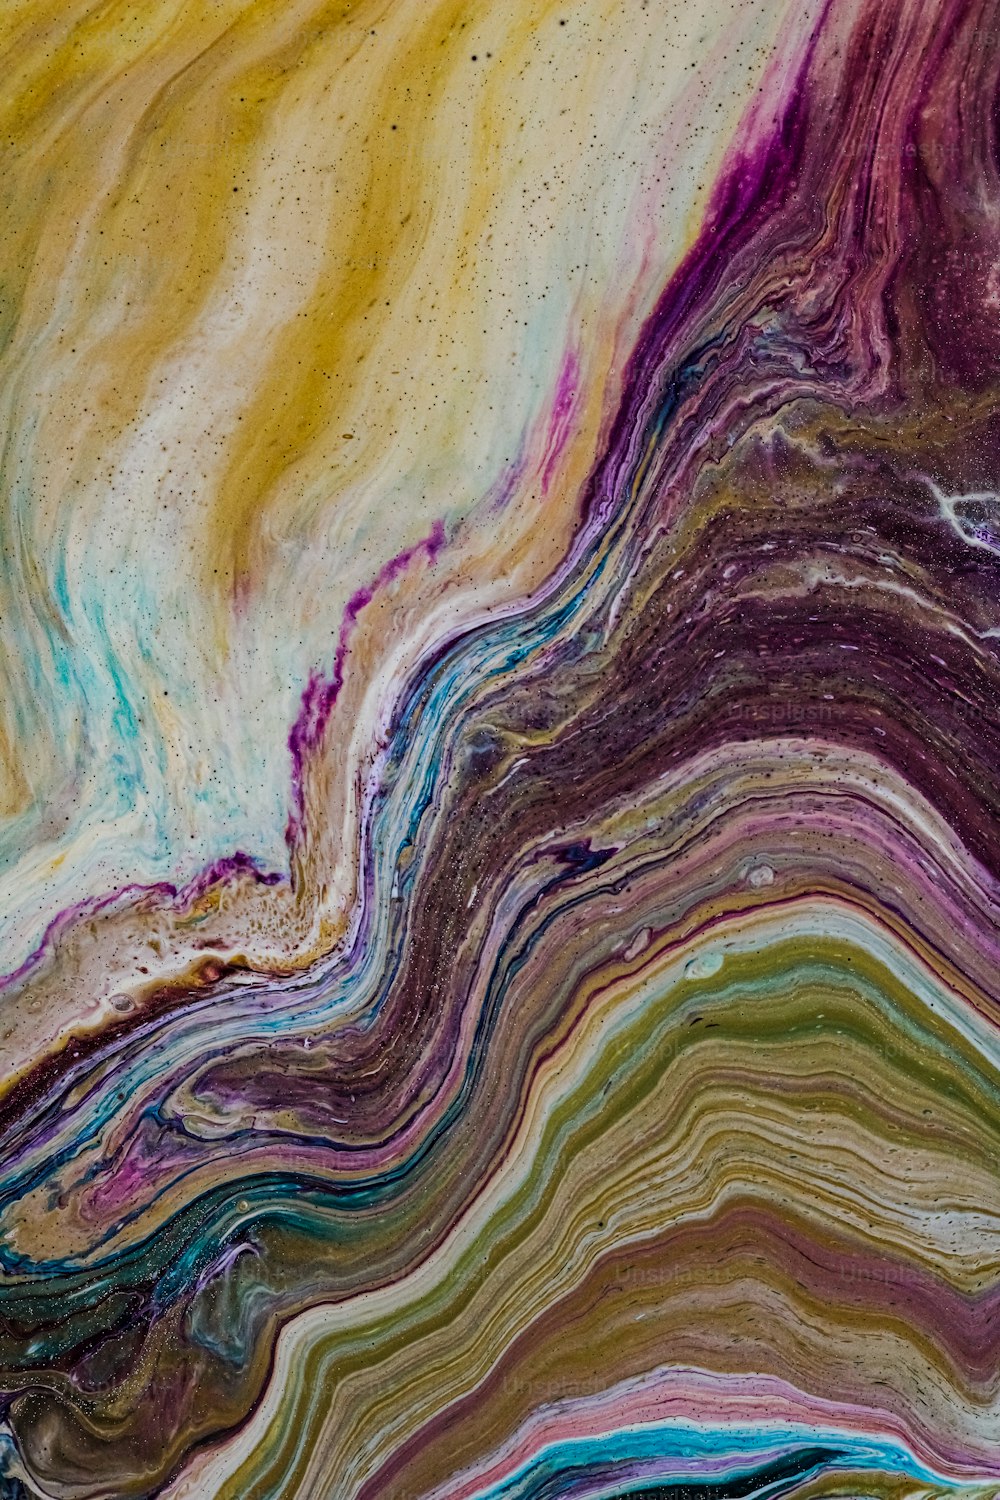 a close up view of a marble surface